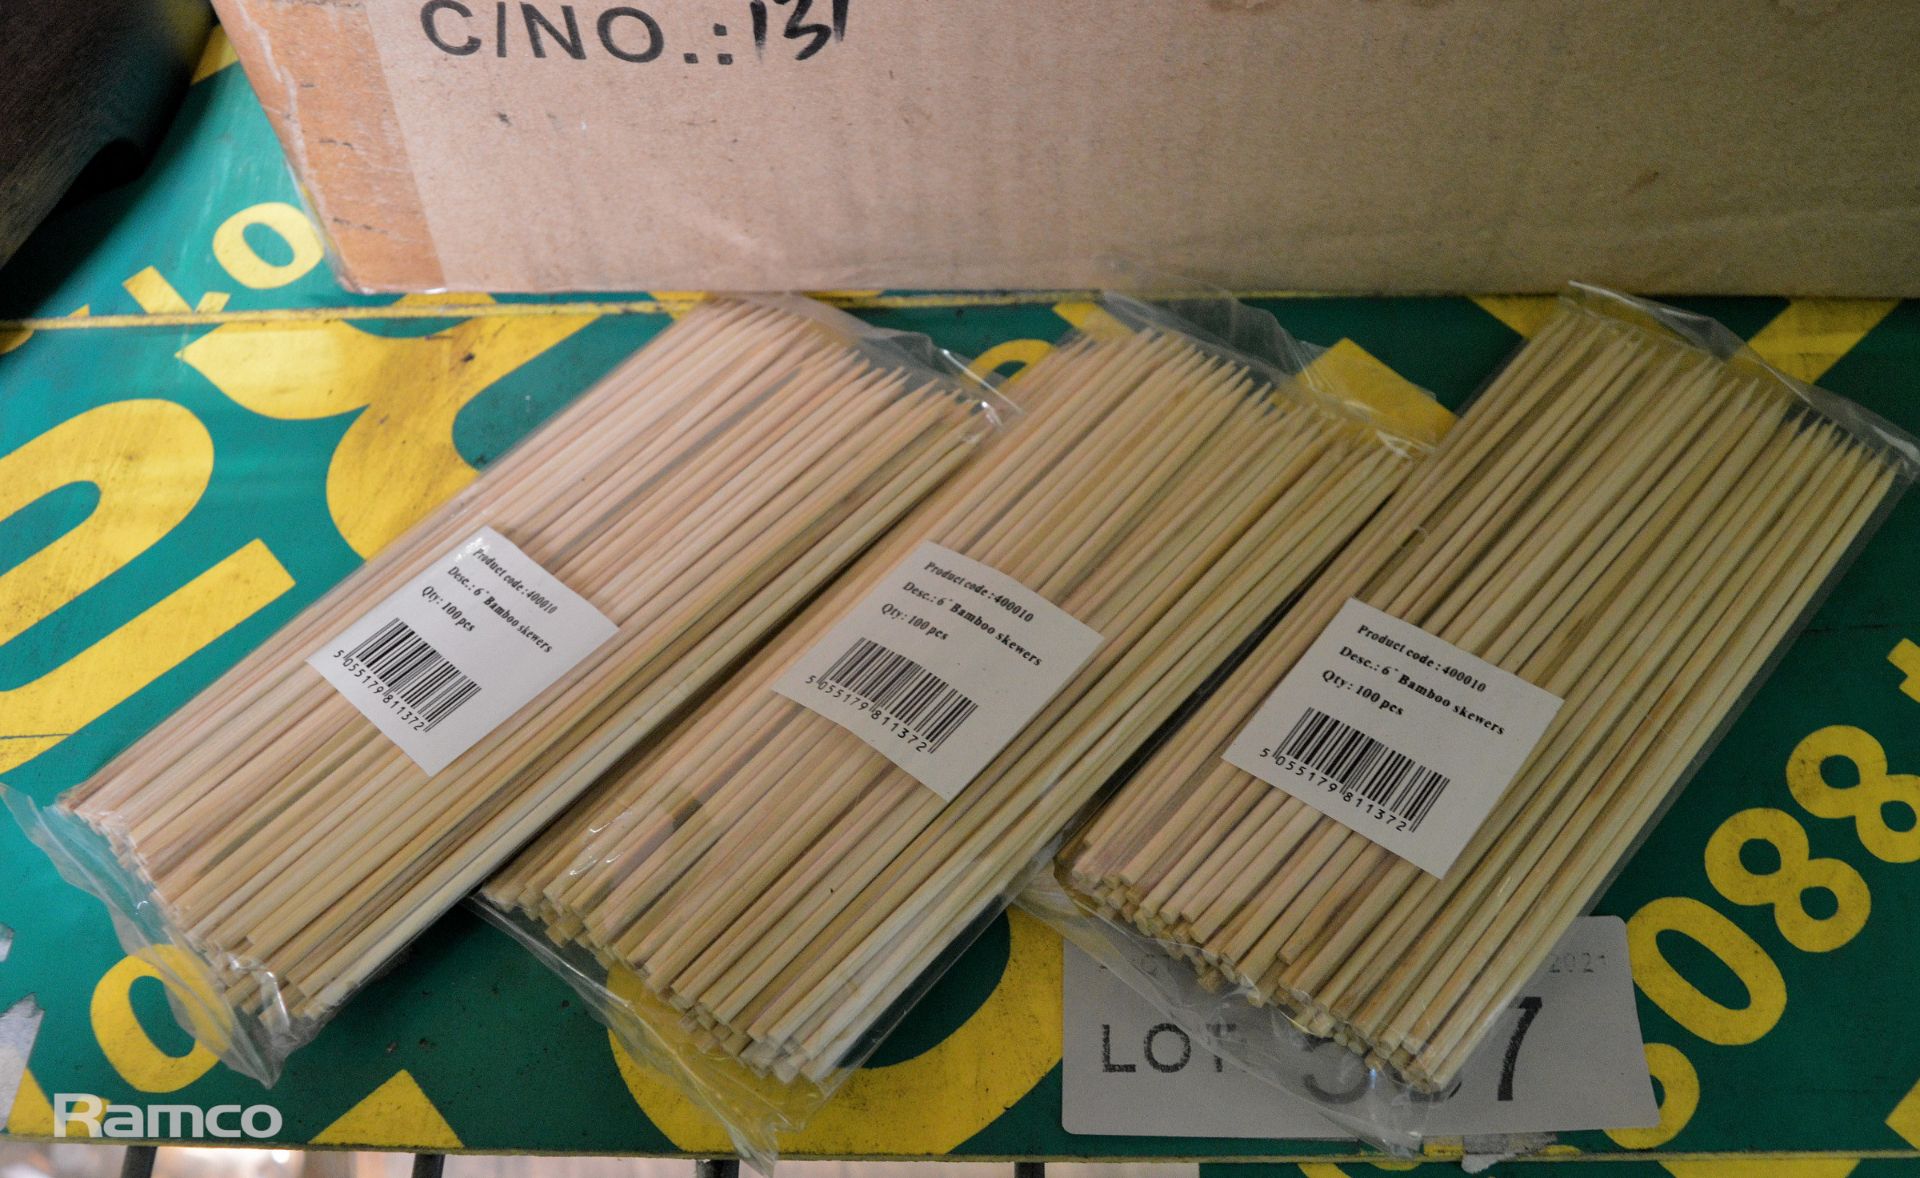 6 Inch Bamboo Skewers - 100 per pack - approx 100 packs - Image 2 of 2